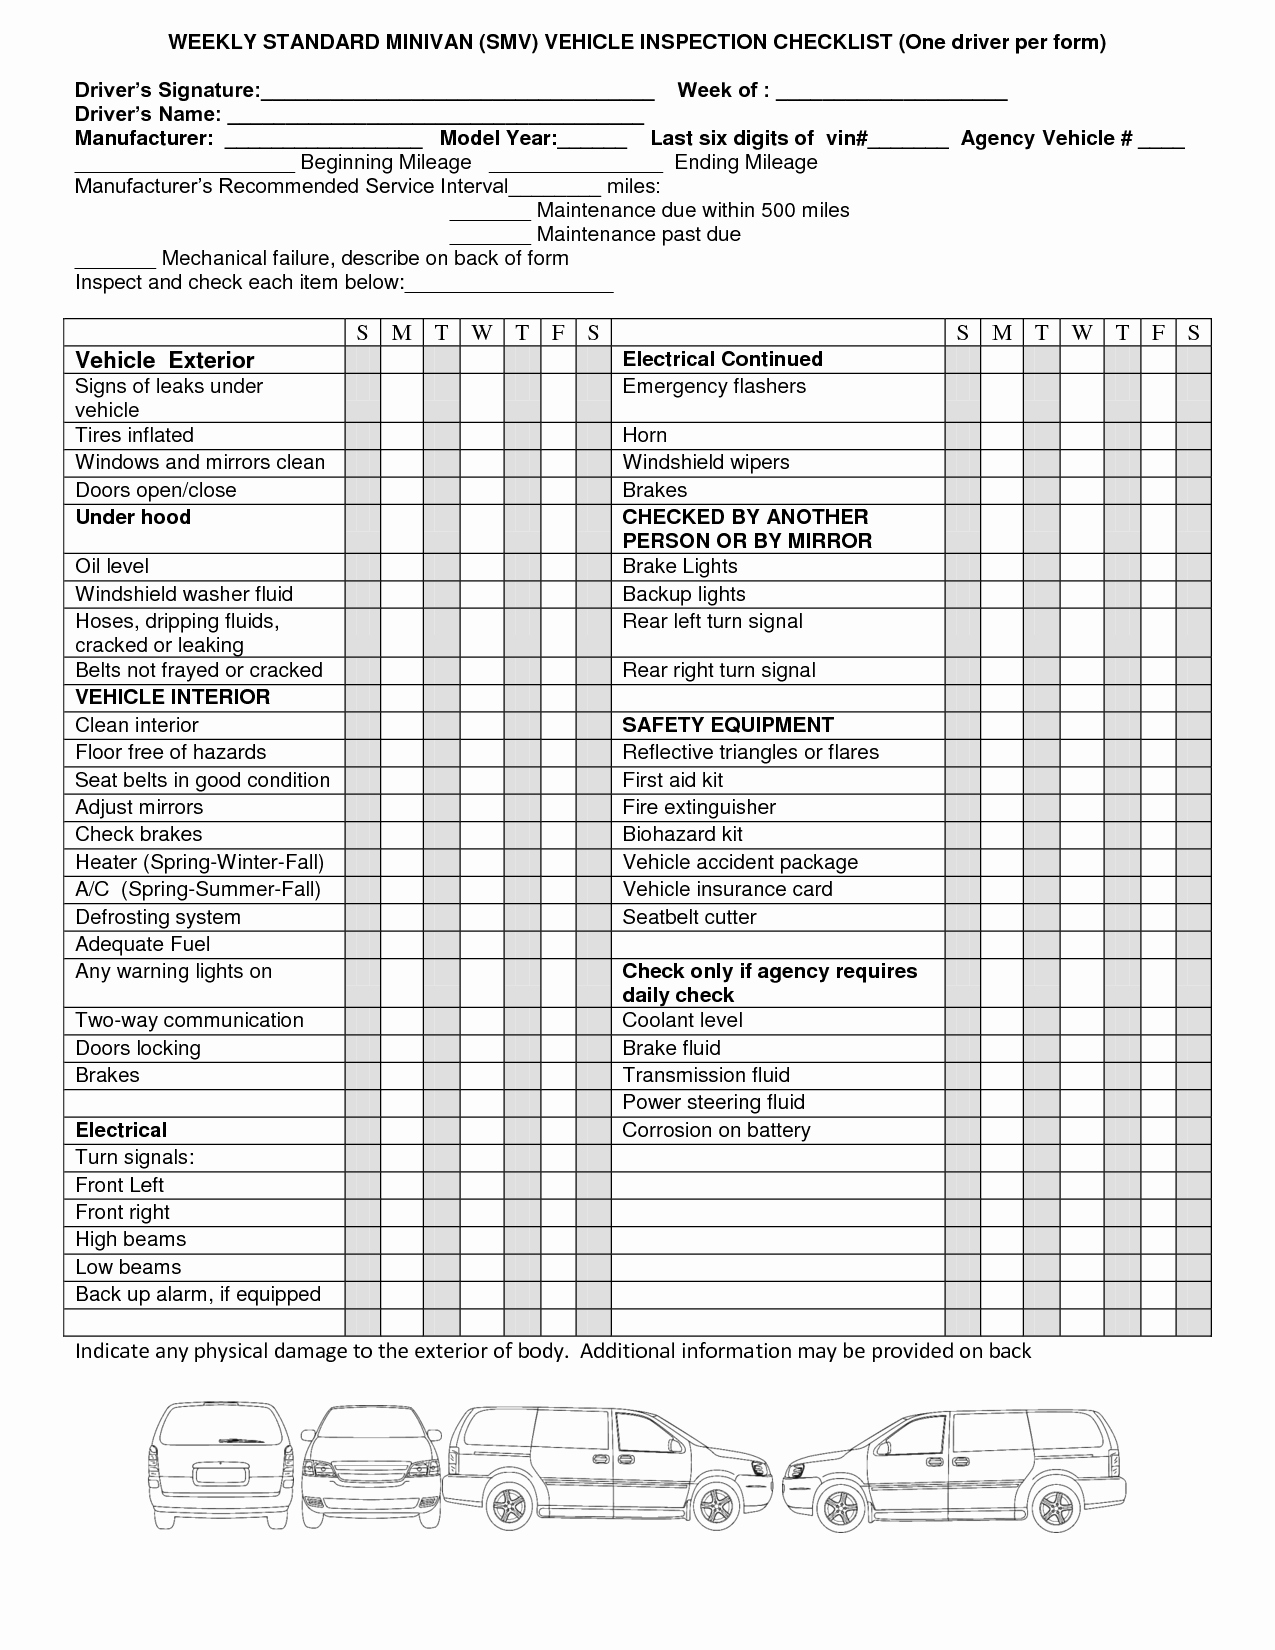 Weekly Vehicle Inspection Checklist Template